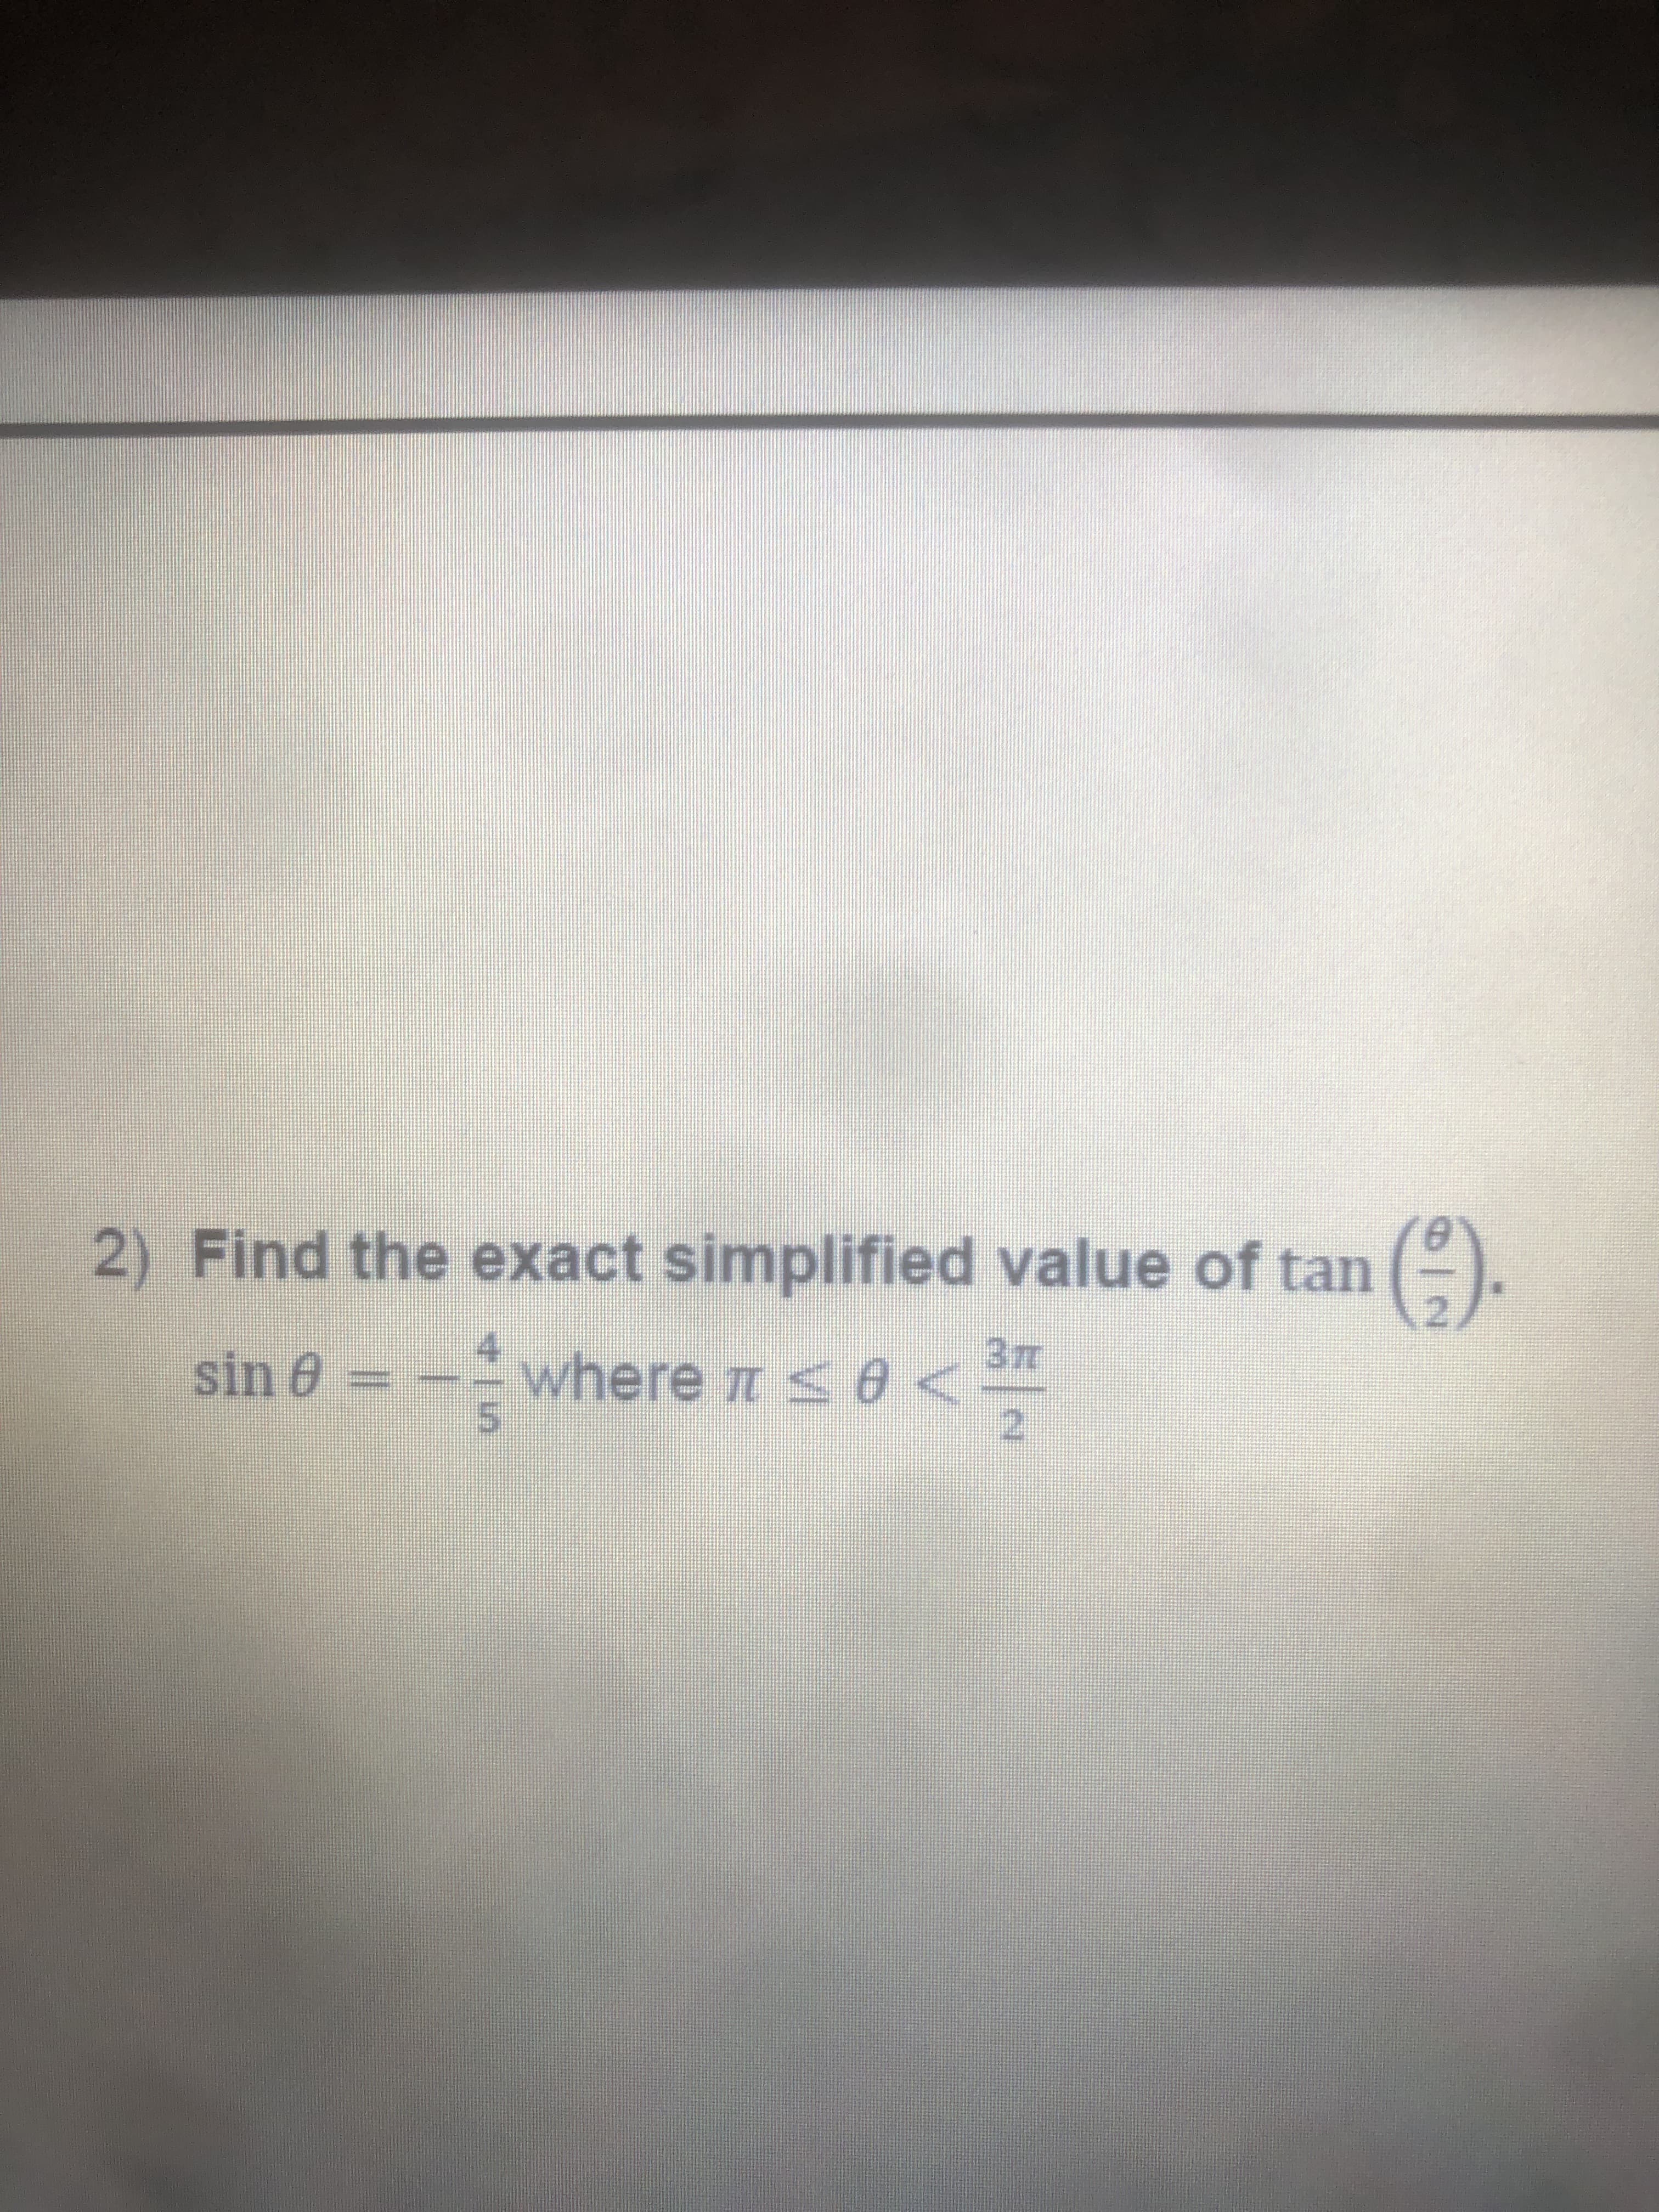 2) Find the exact simplified value of tan
2,
()
3m
sin 0
where n s0<4
2.
